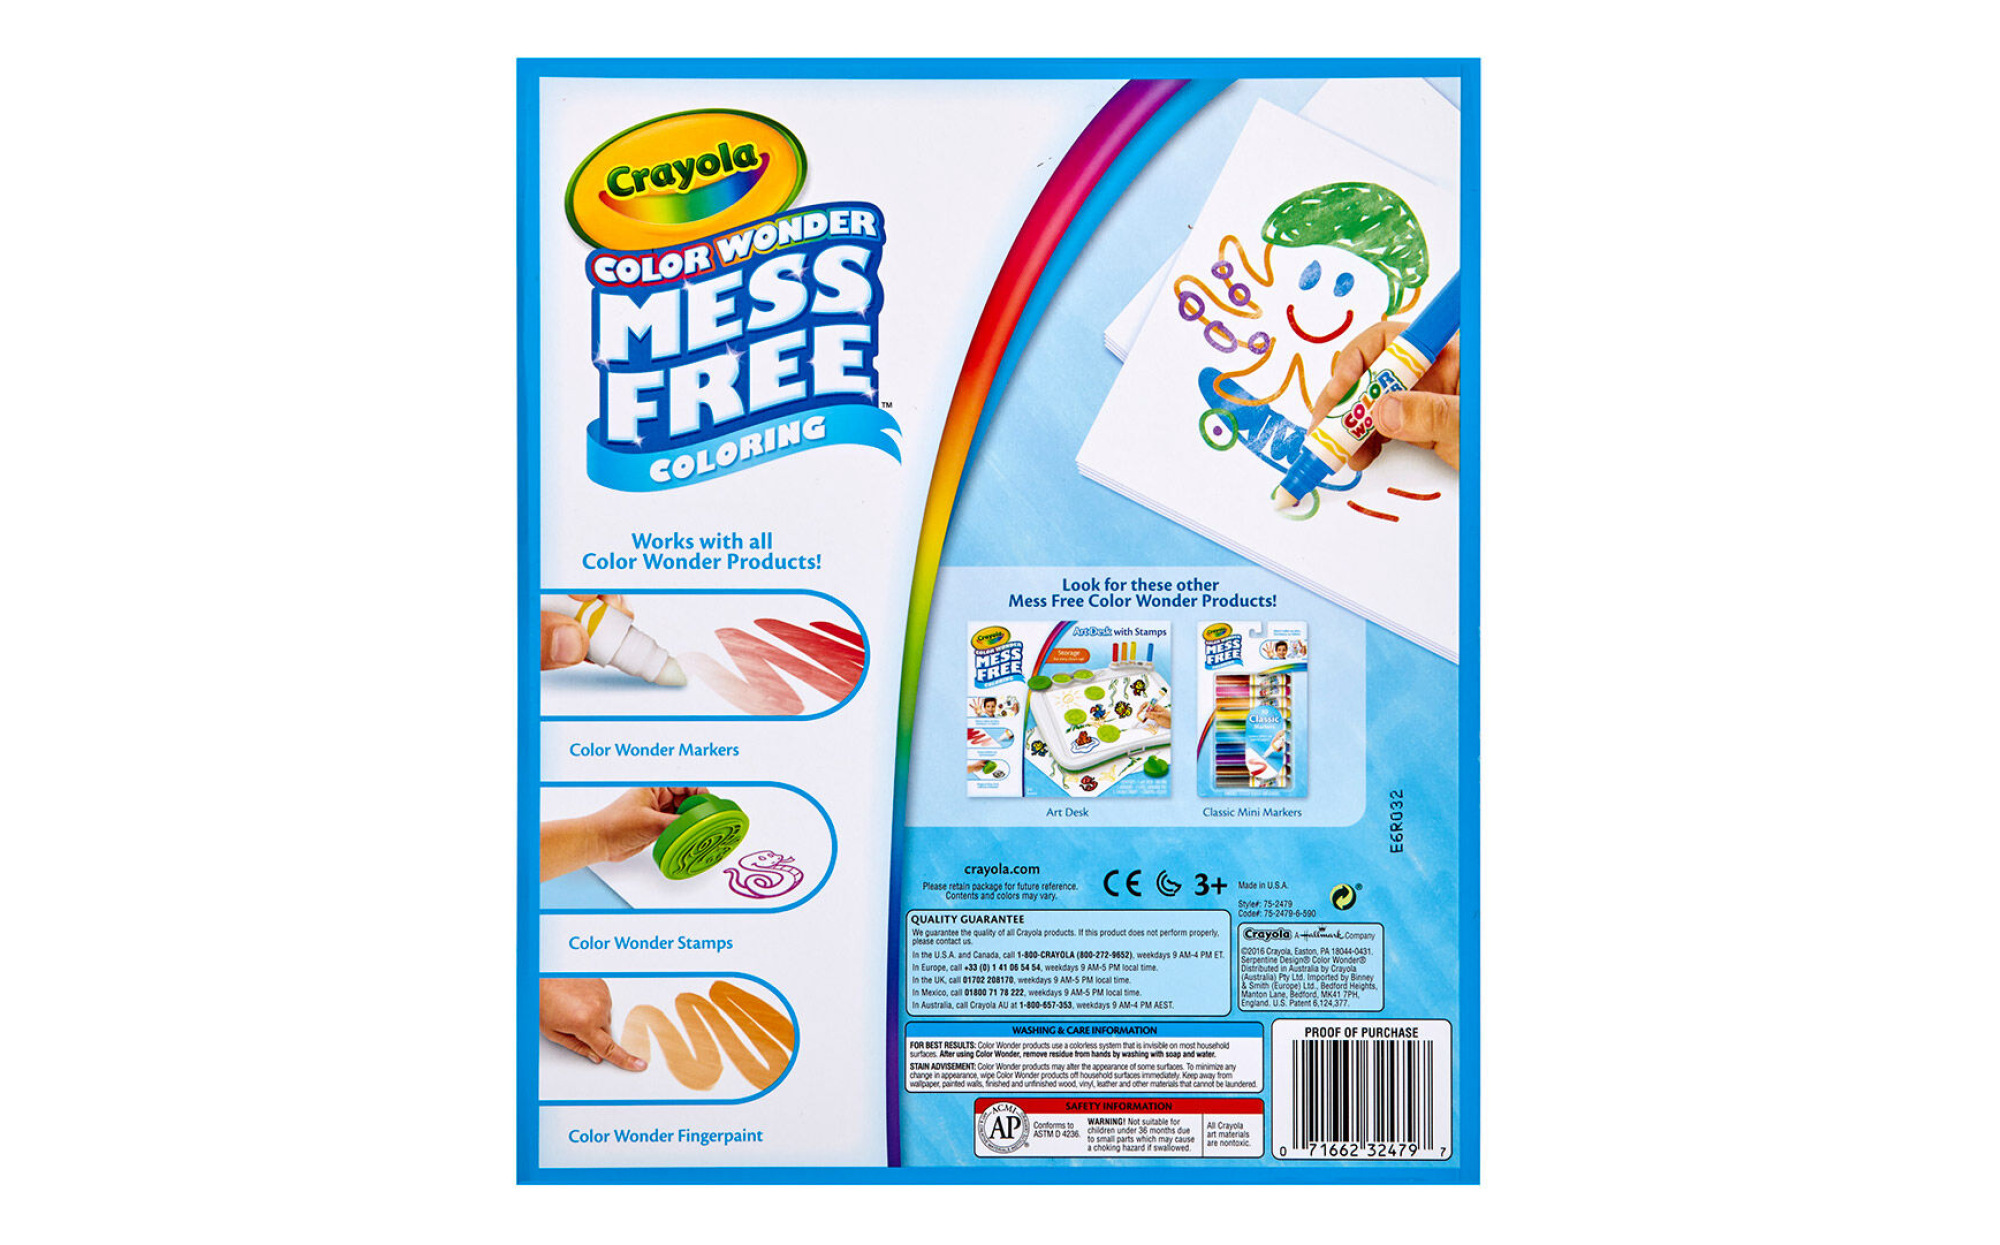 Learn About Crayola Color Wonder Mess Free